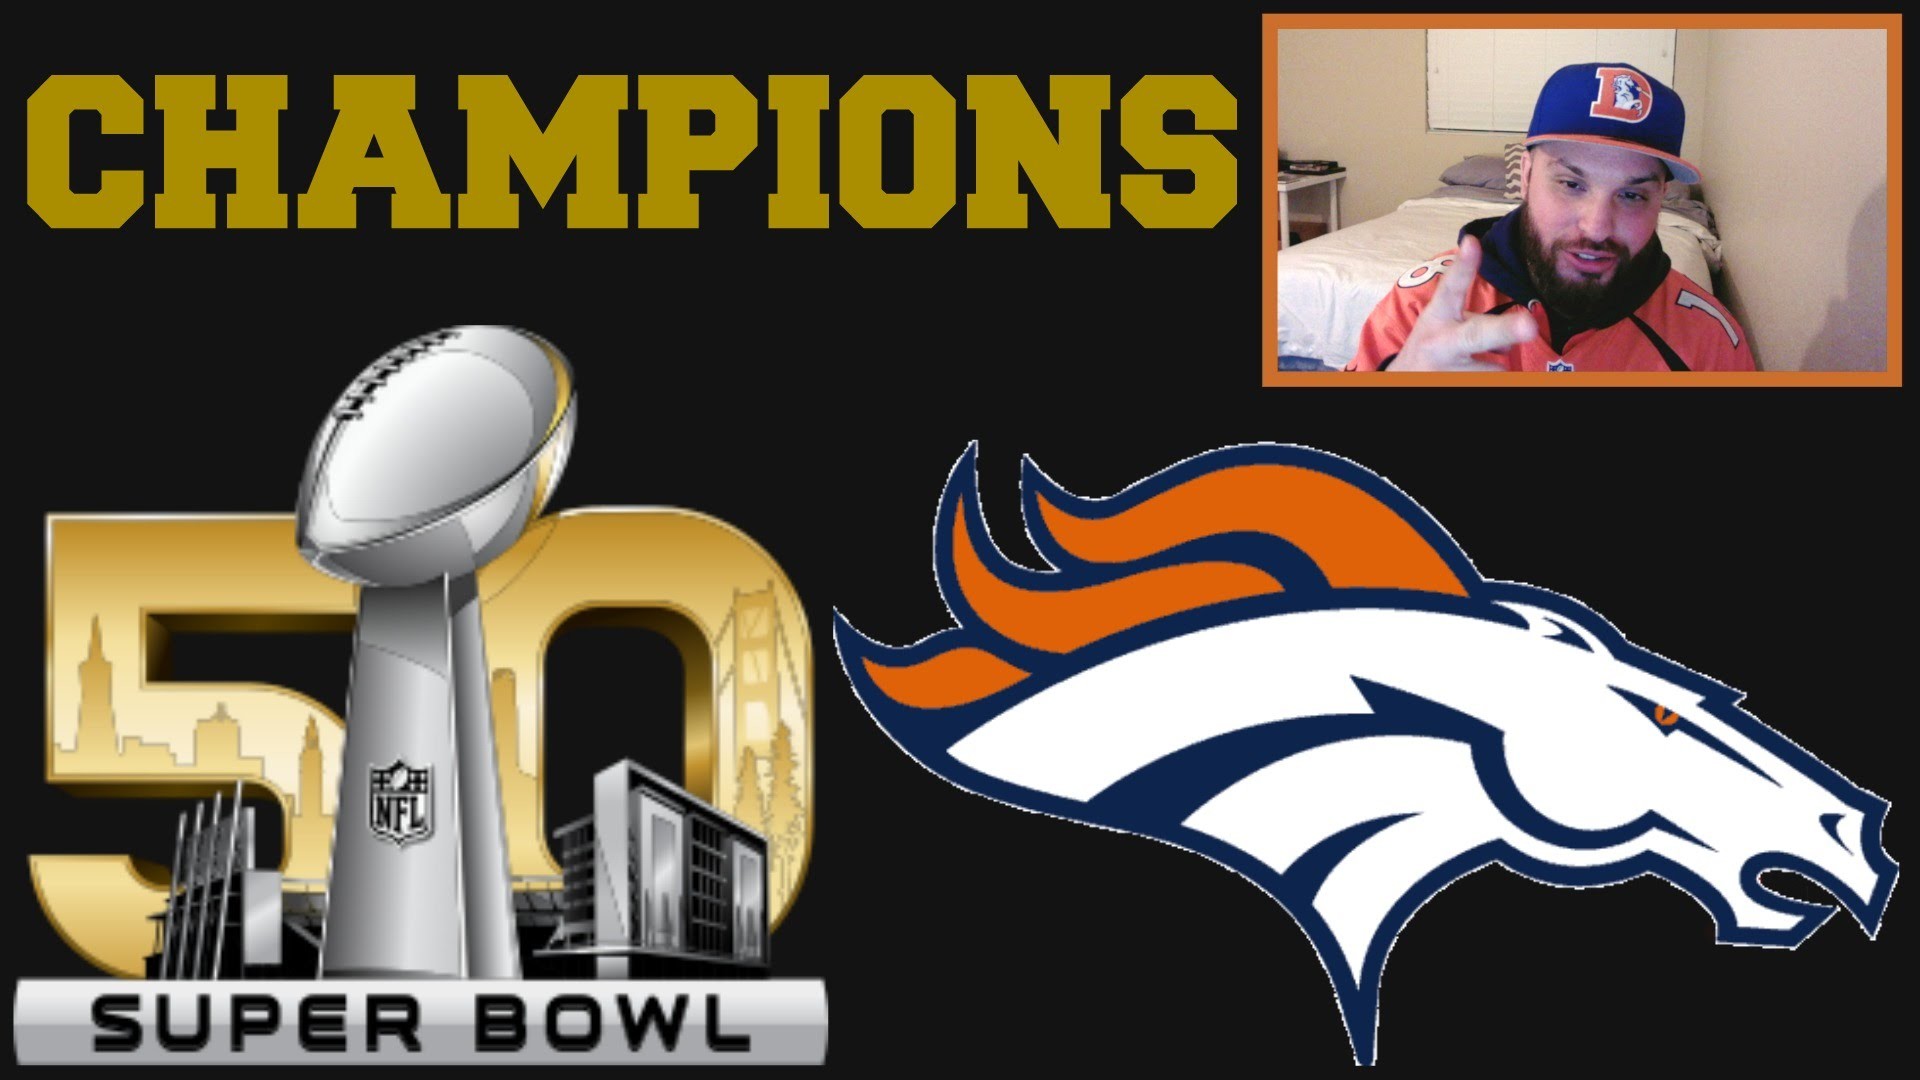 1920x1080 Denver Broncos Super Bowl 50 Champions!!! Call Of Duty: Black Ops 3  "Sniping svg-100"